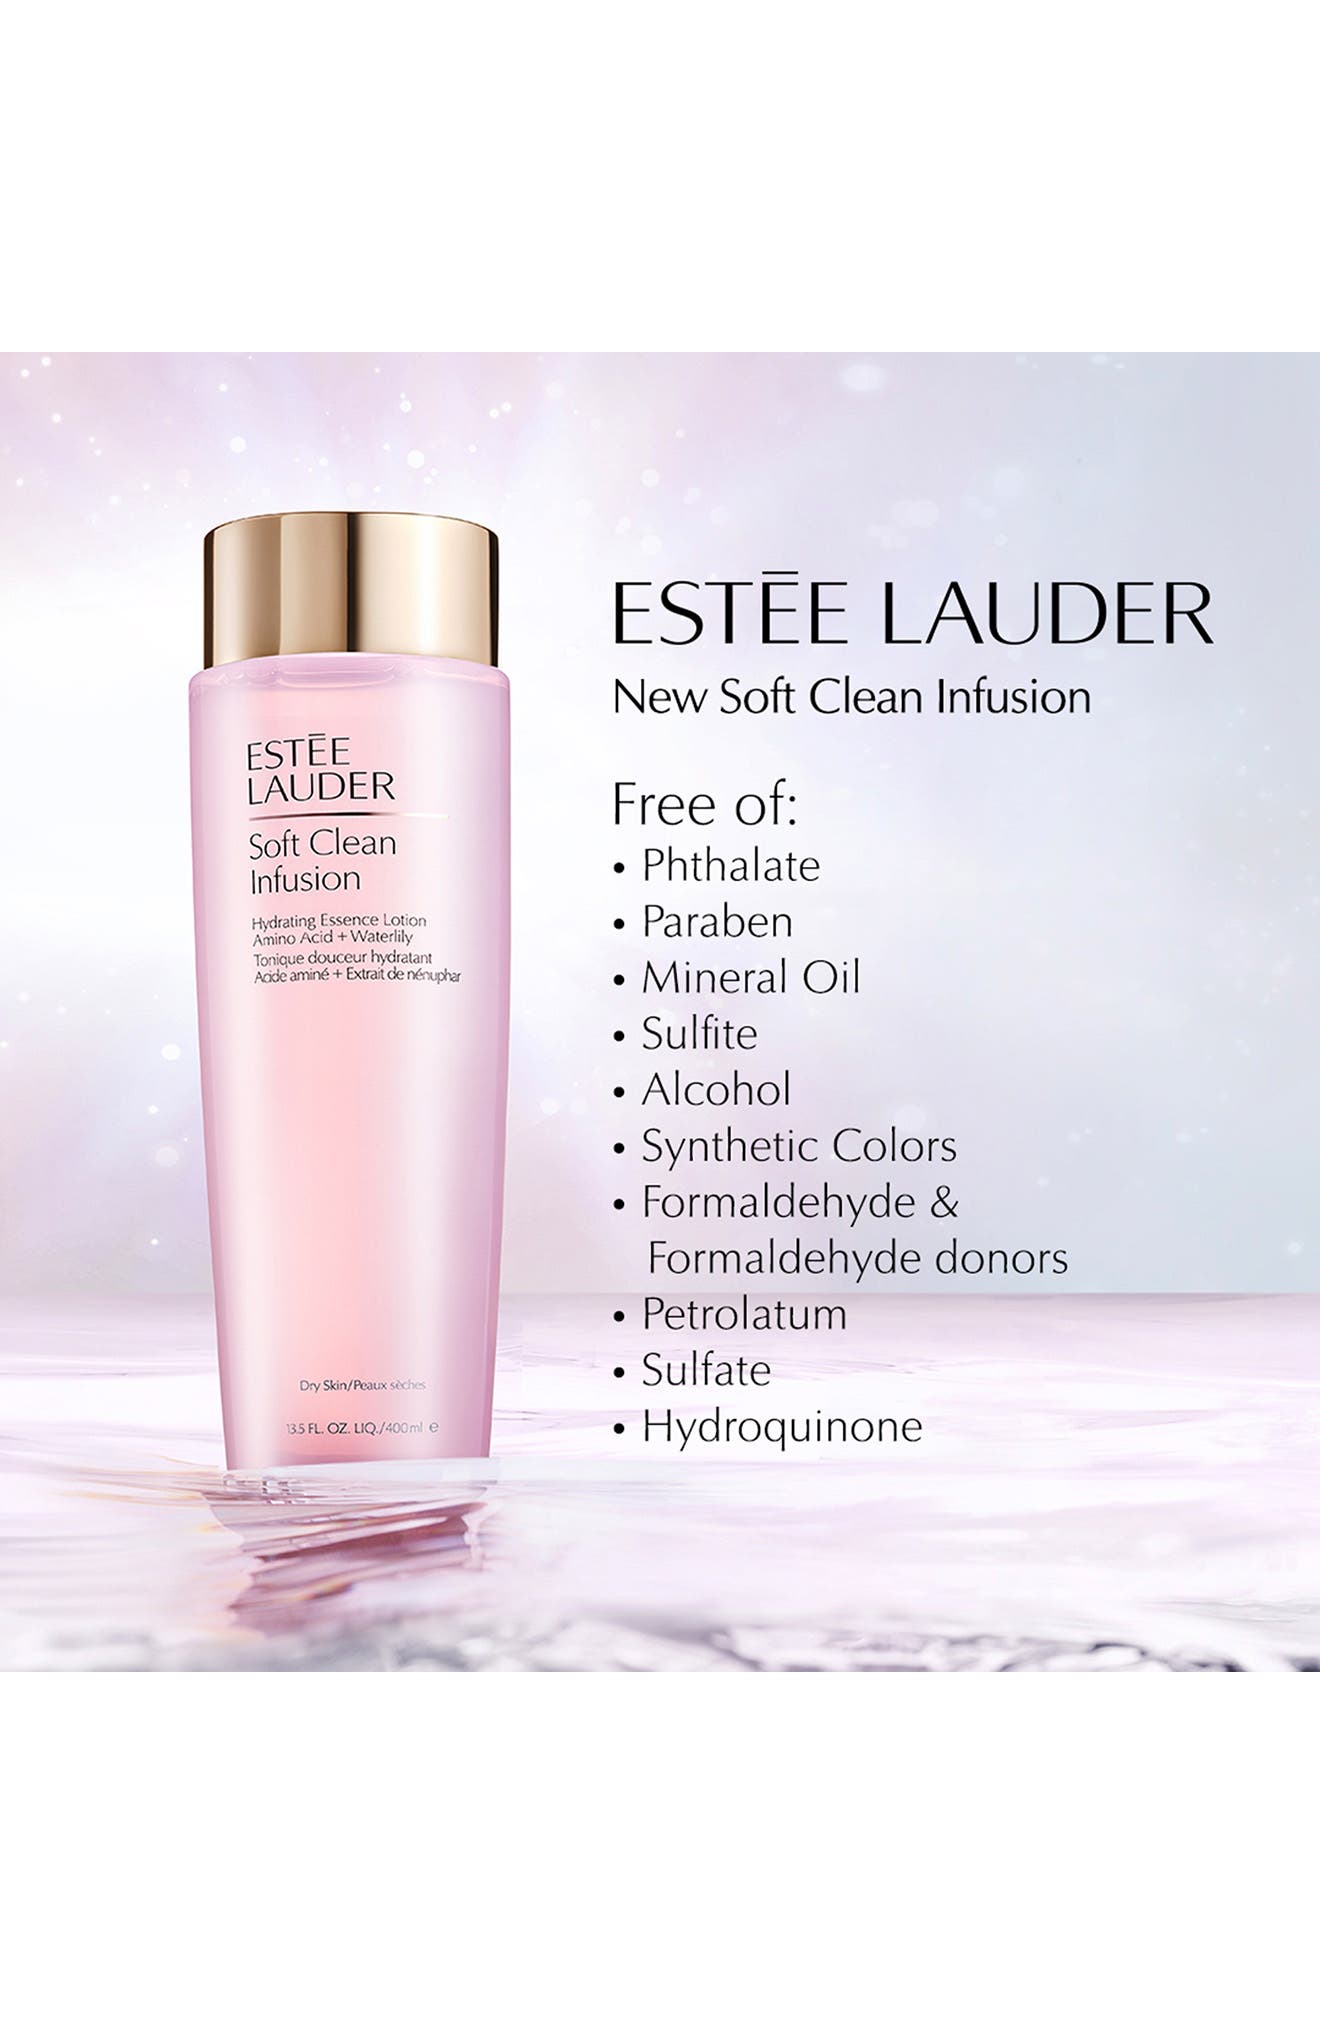 Estee Lauder Soft Clean Infusion Hydrating Essence Treatment Lotion